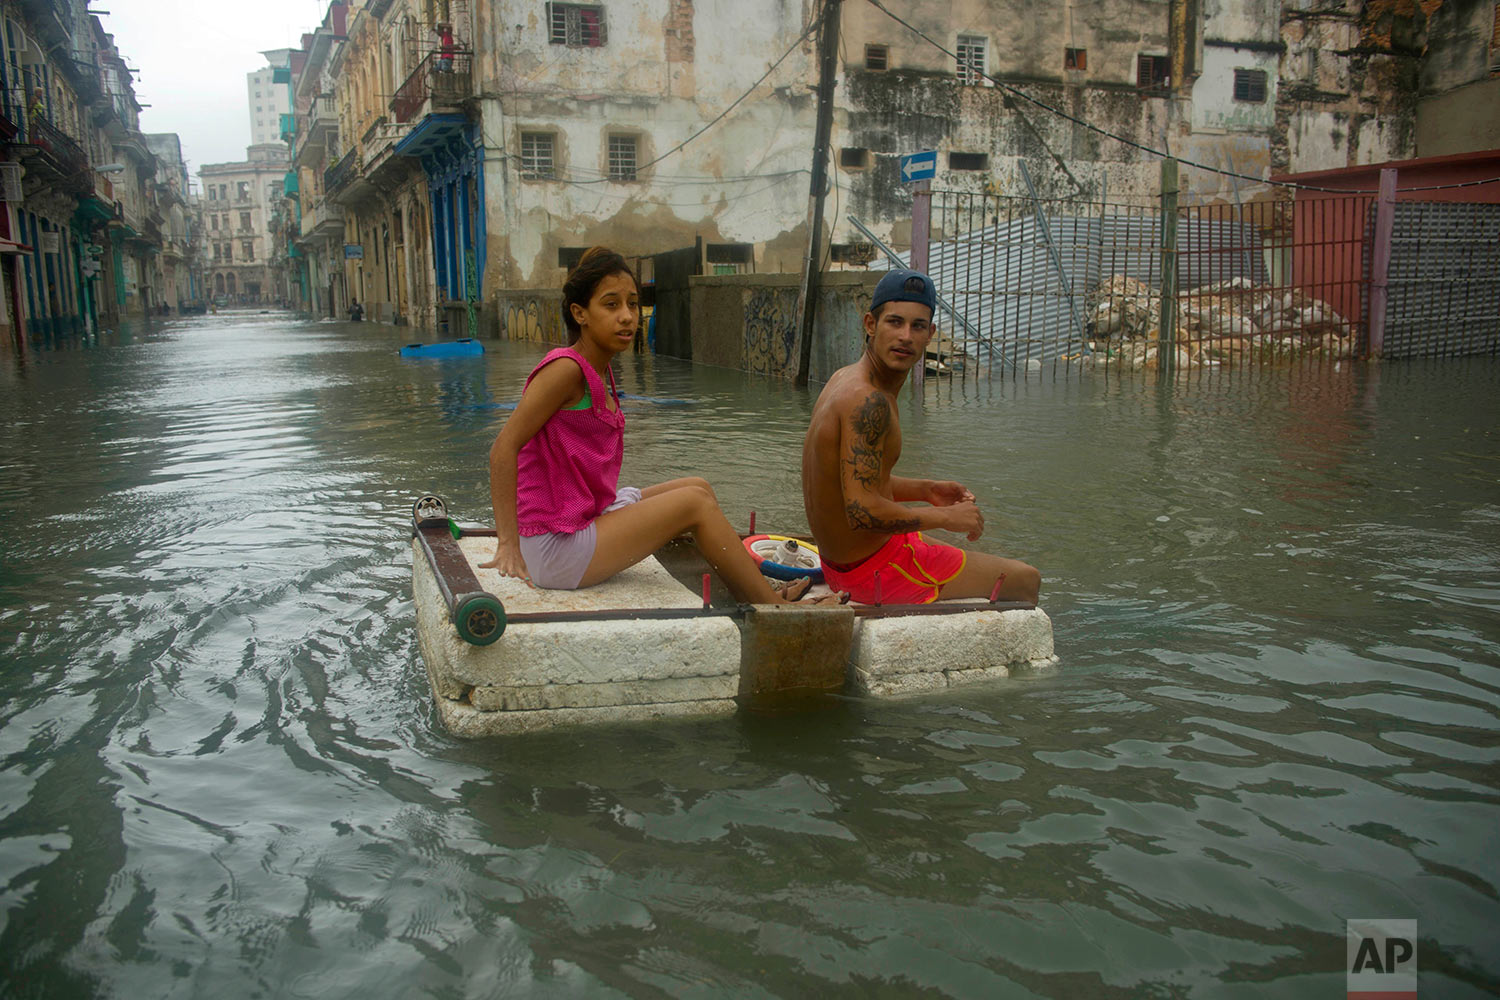  A couple floats down a flooded street in Havana atop a large piece of styrofoam, after the passing of Hurricane Irma in Cuba, Sunday, Sept. 10, 2017. The powerful storm ripped roofs off houses, collapsed buildings and flooded hundreds of miles of co